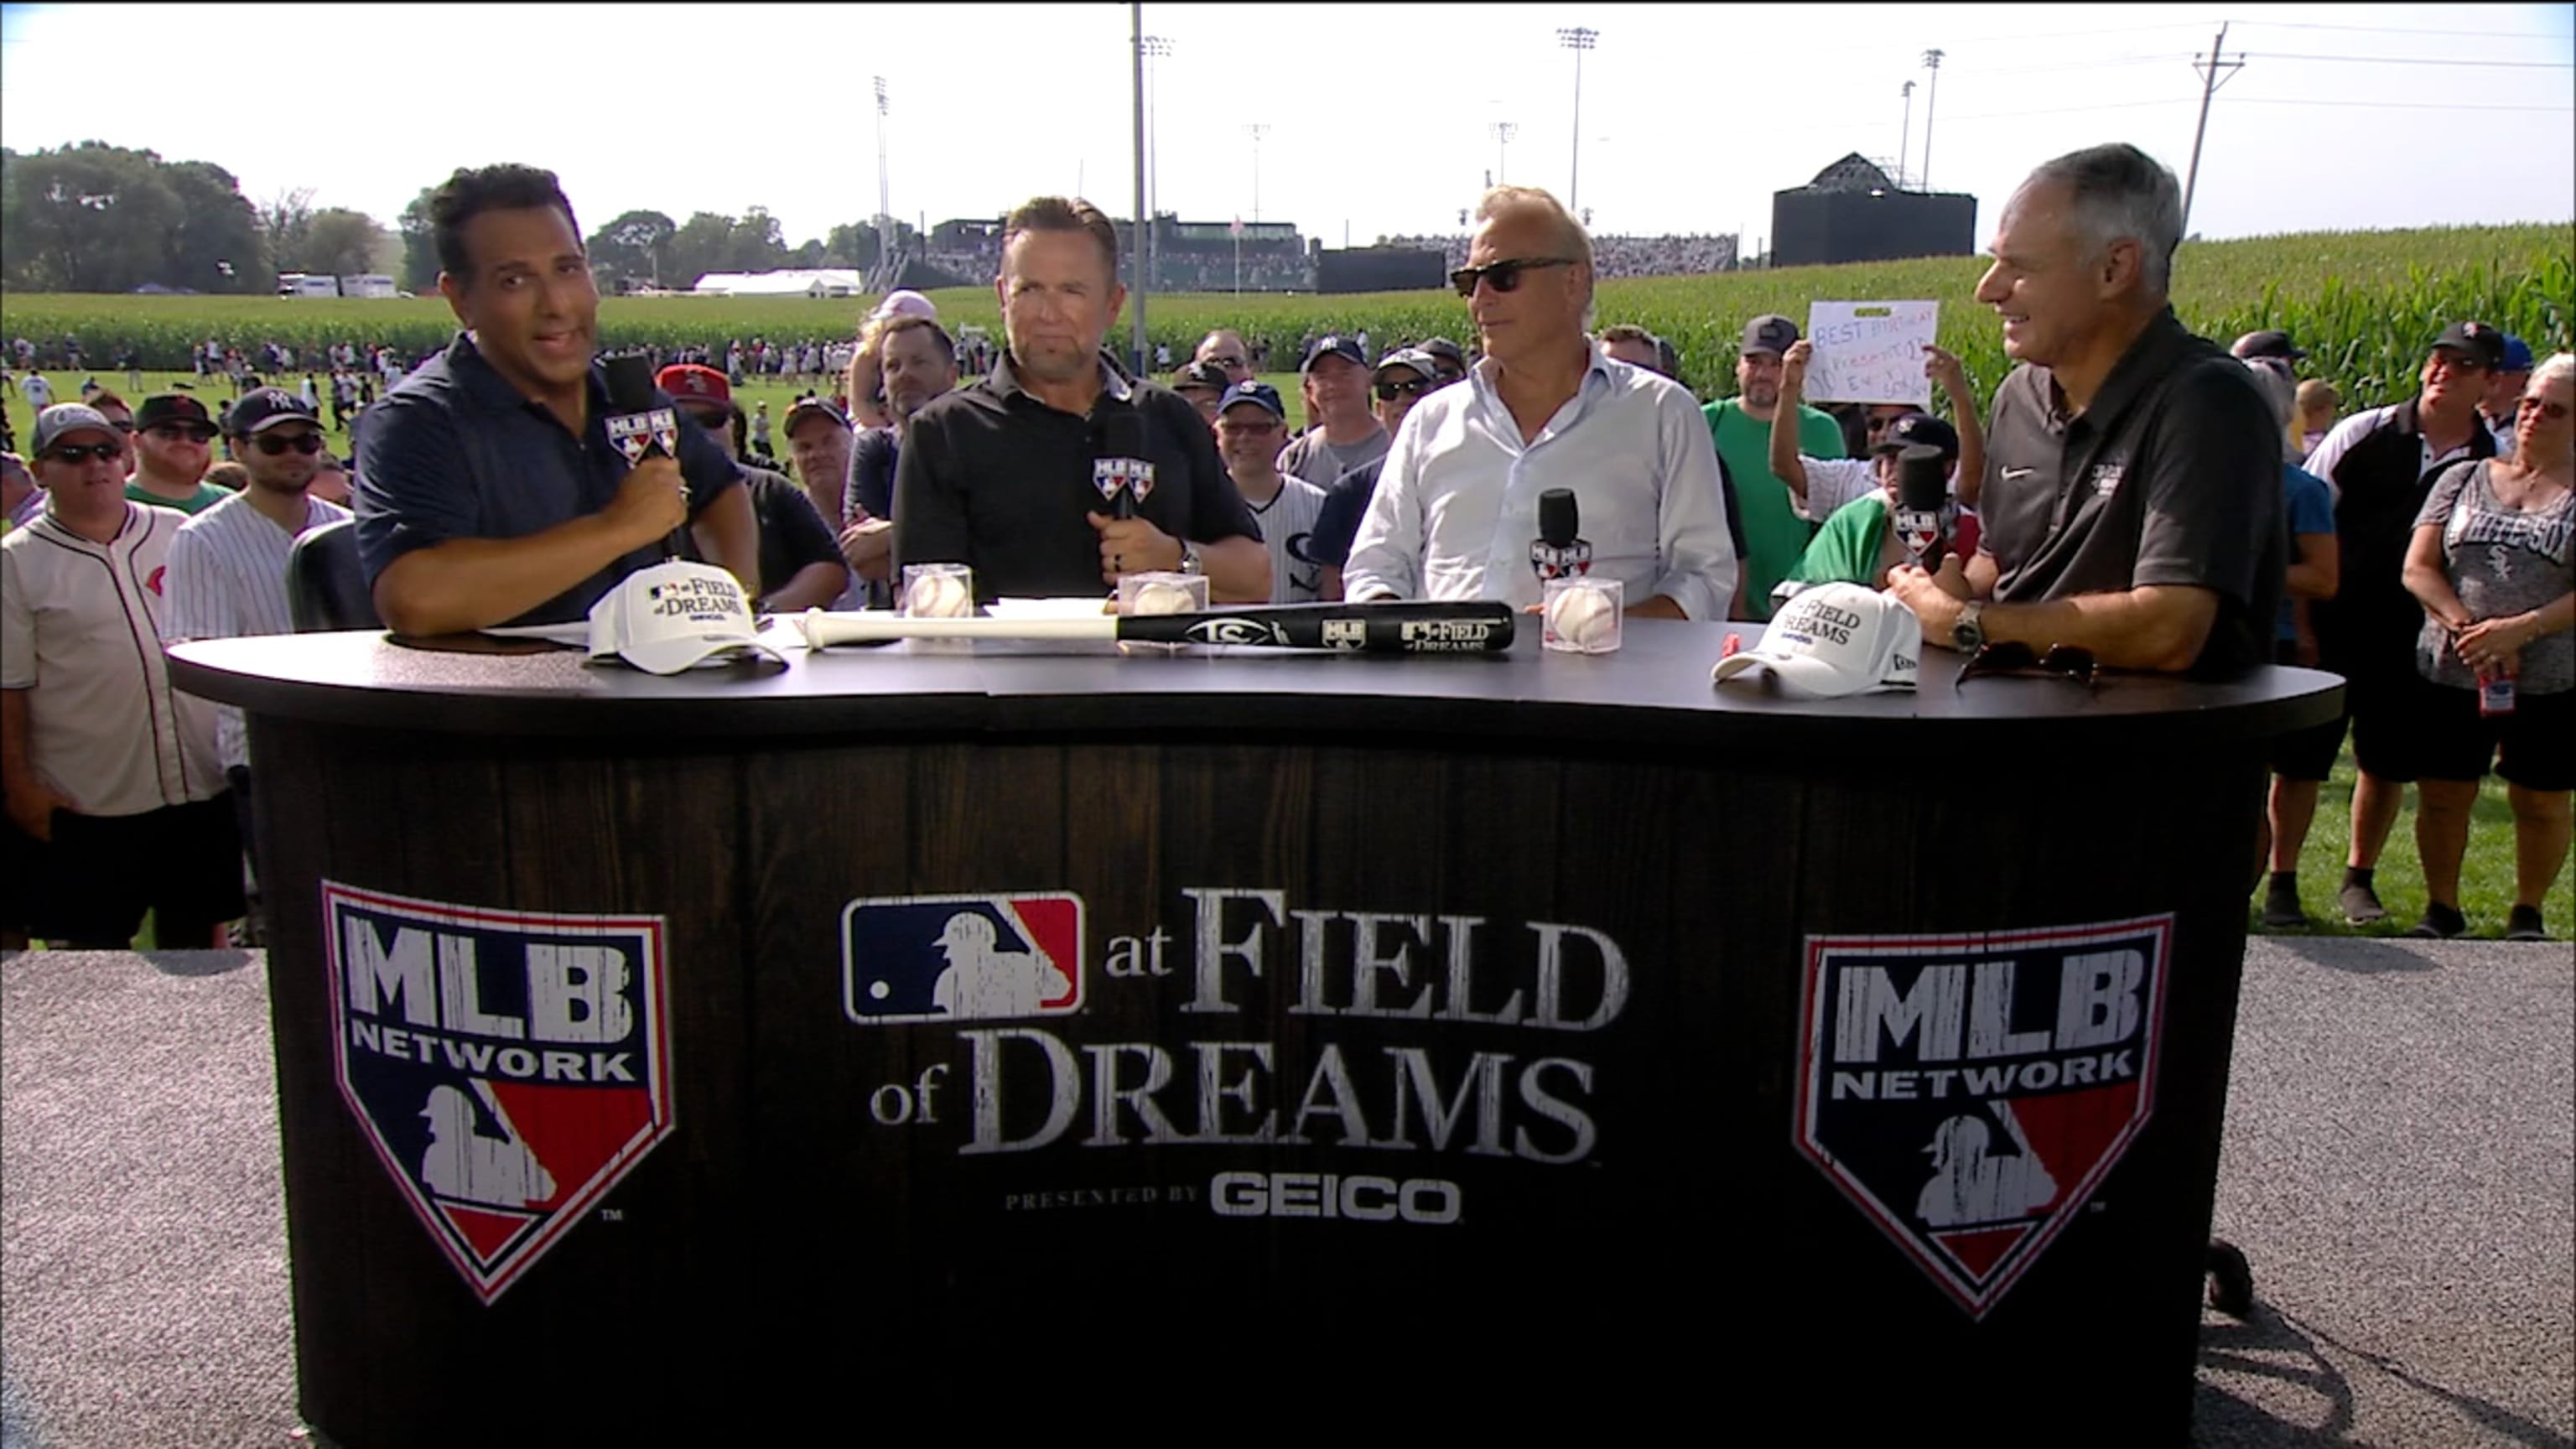 UPDATE: Commissioner: MLB to host game at Field of Dreams in 2022, Breaking